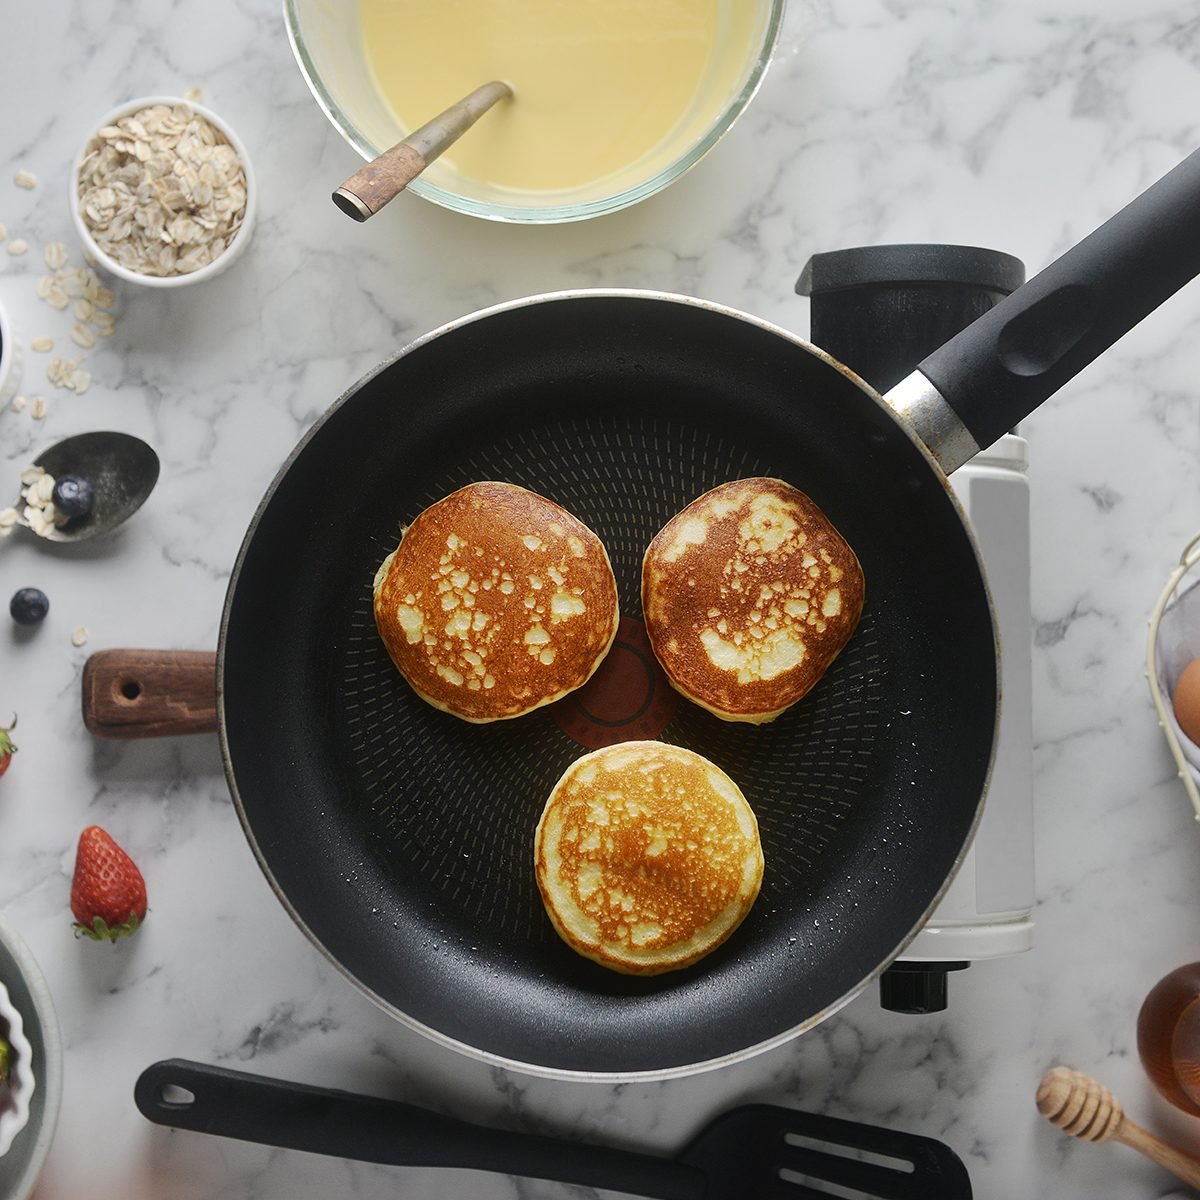 https://www.tasteofhome.com/wp-content/uploads/2020/02/pancakes-onto-the-pan-concept-of-cooking-GettyImages-1148827579.jpg?fit=700%2C700